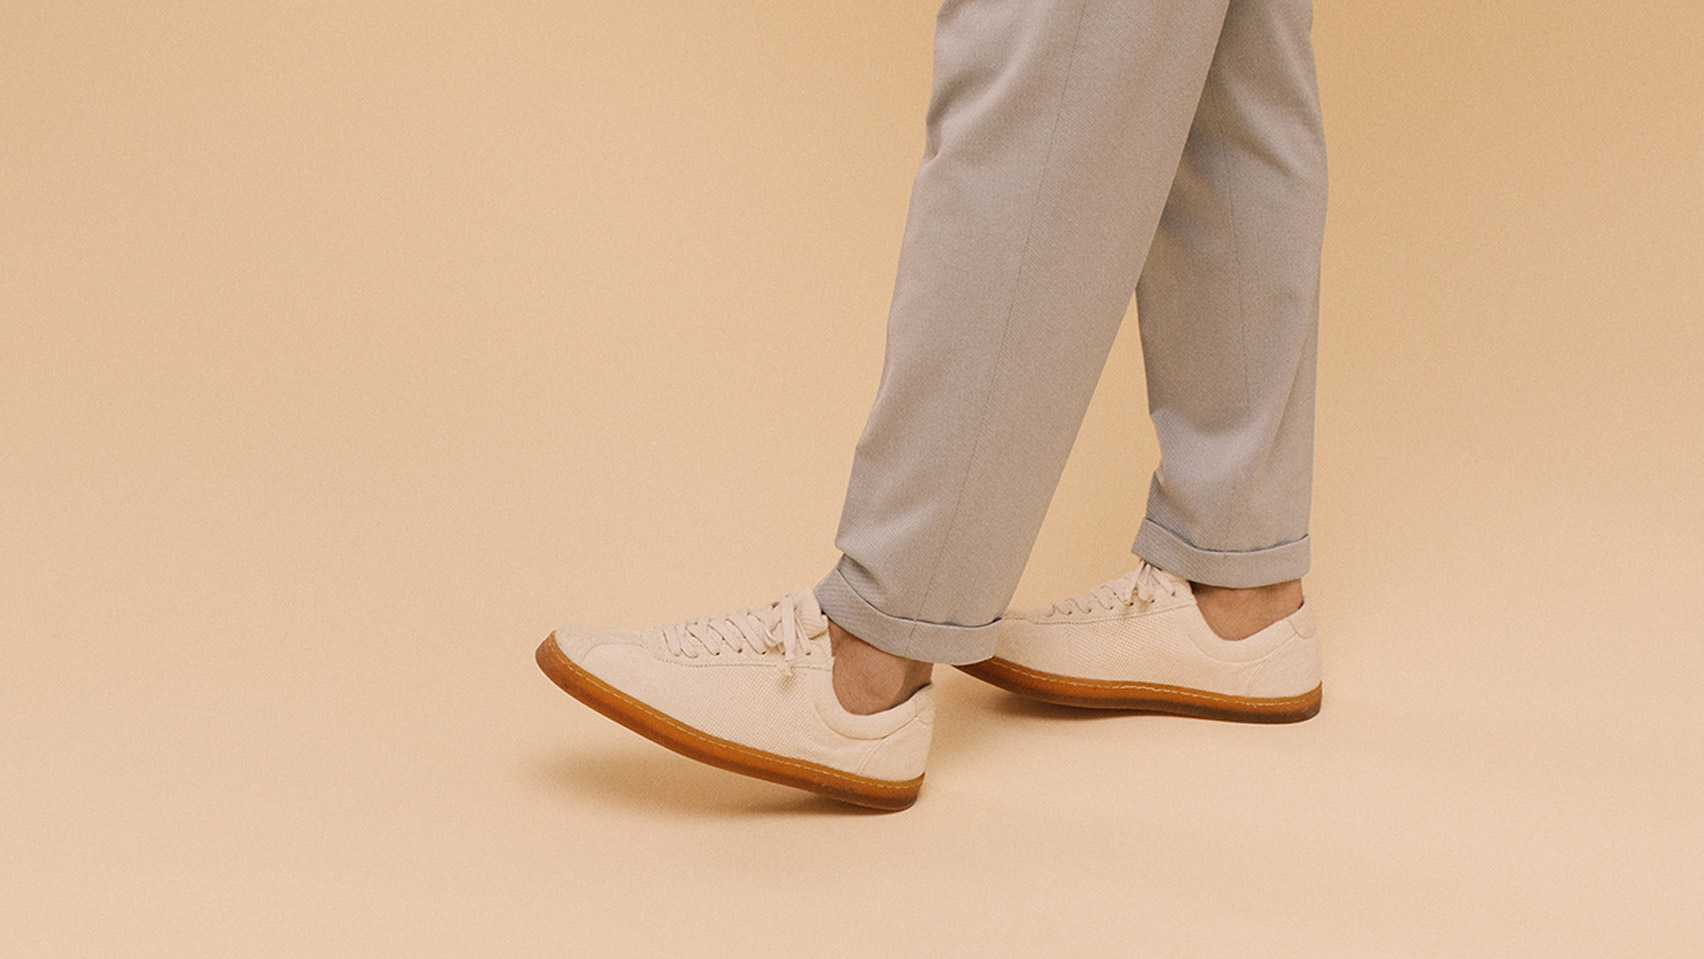 Native Shoes makes plant-based sneakers 